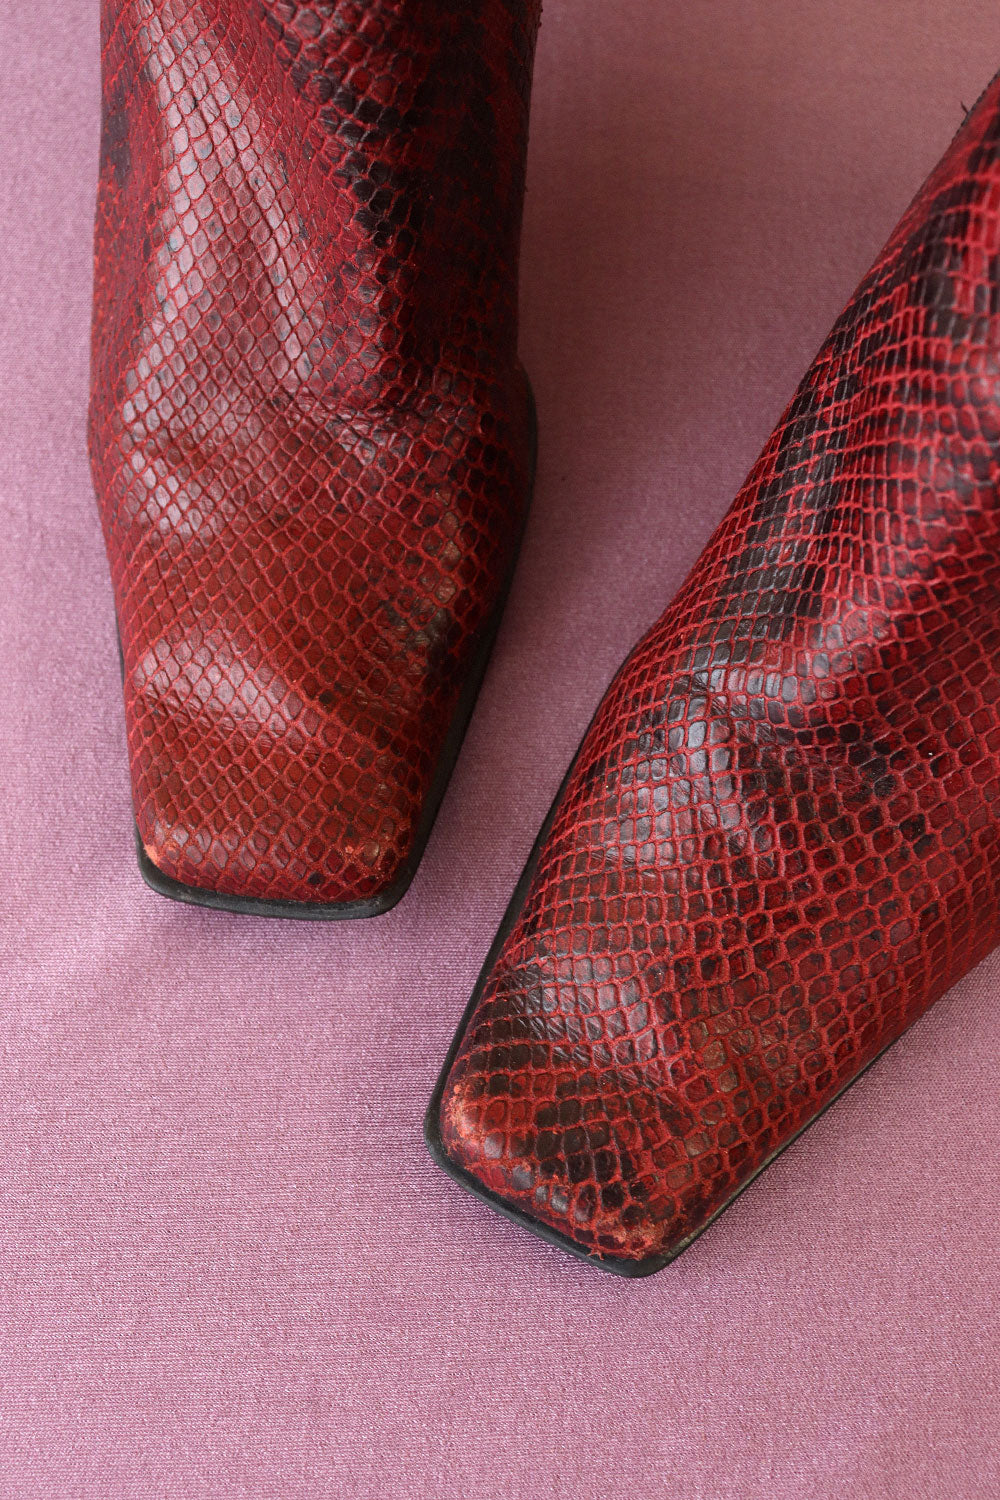 Blood Red Snake Booties 7/7.5